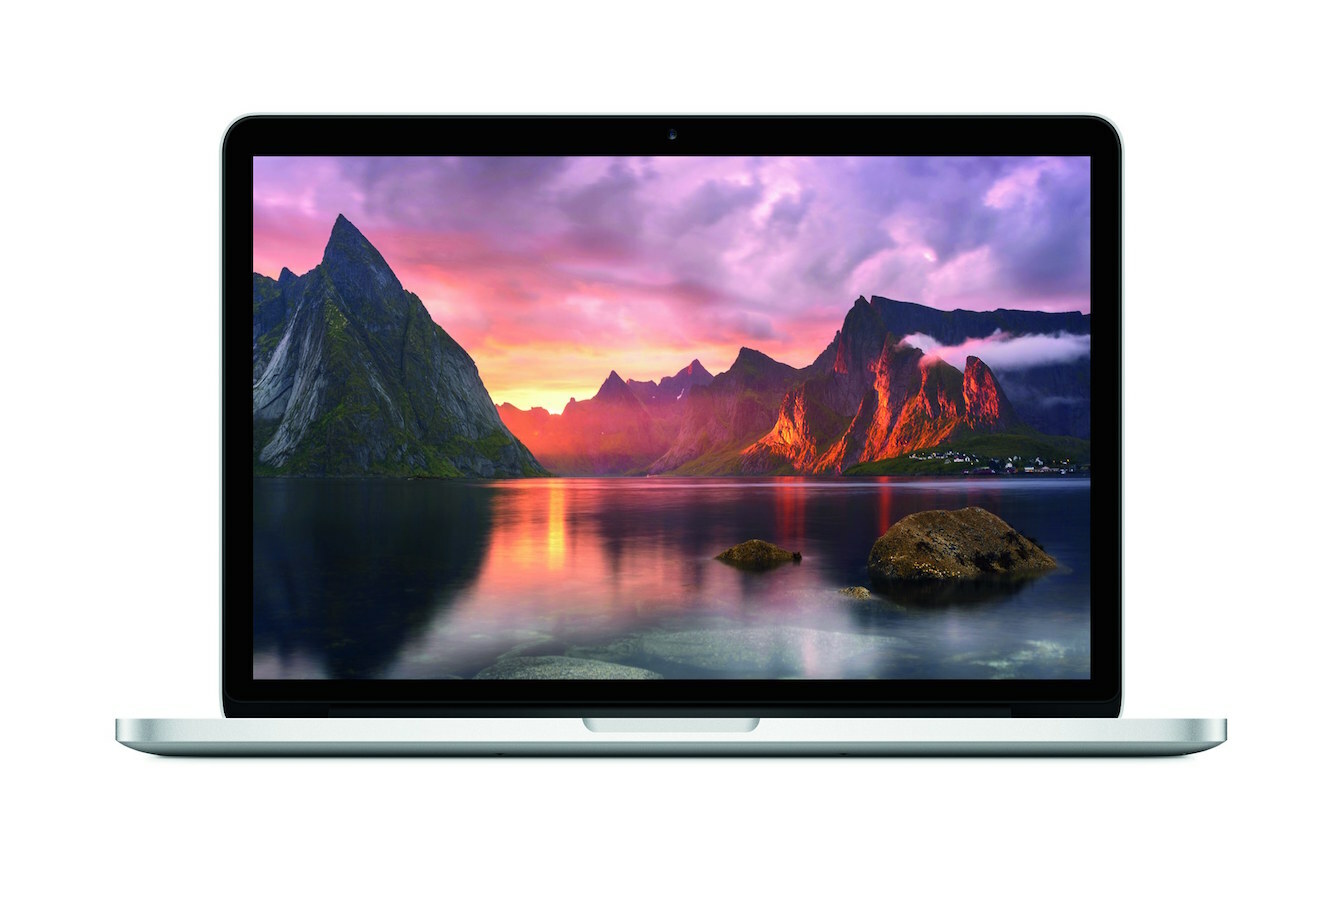 Macbook pro 13 inch retina display 2014 review can i charge my macbook at apple store